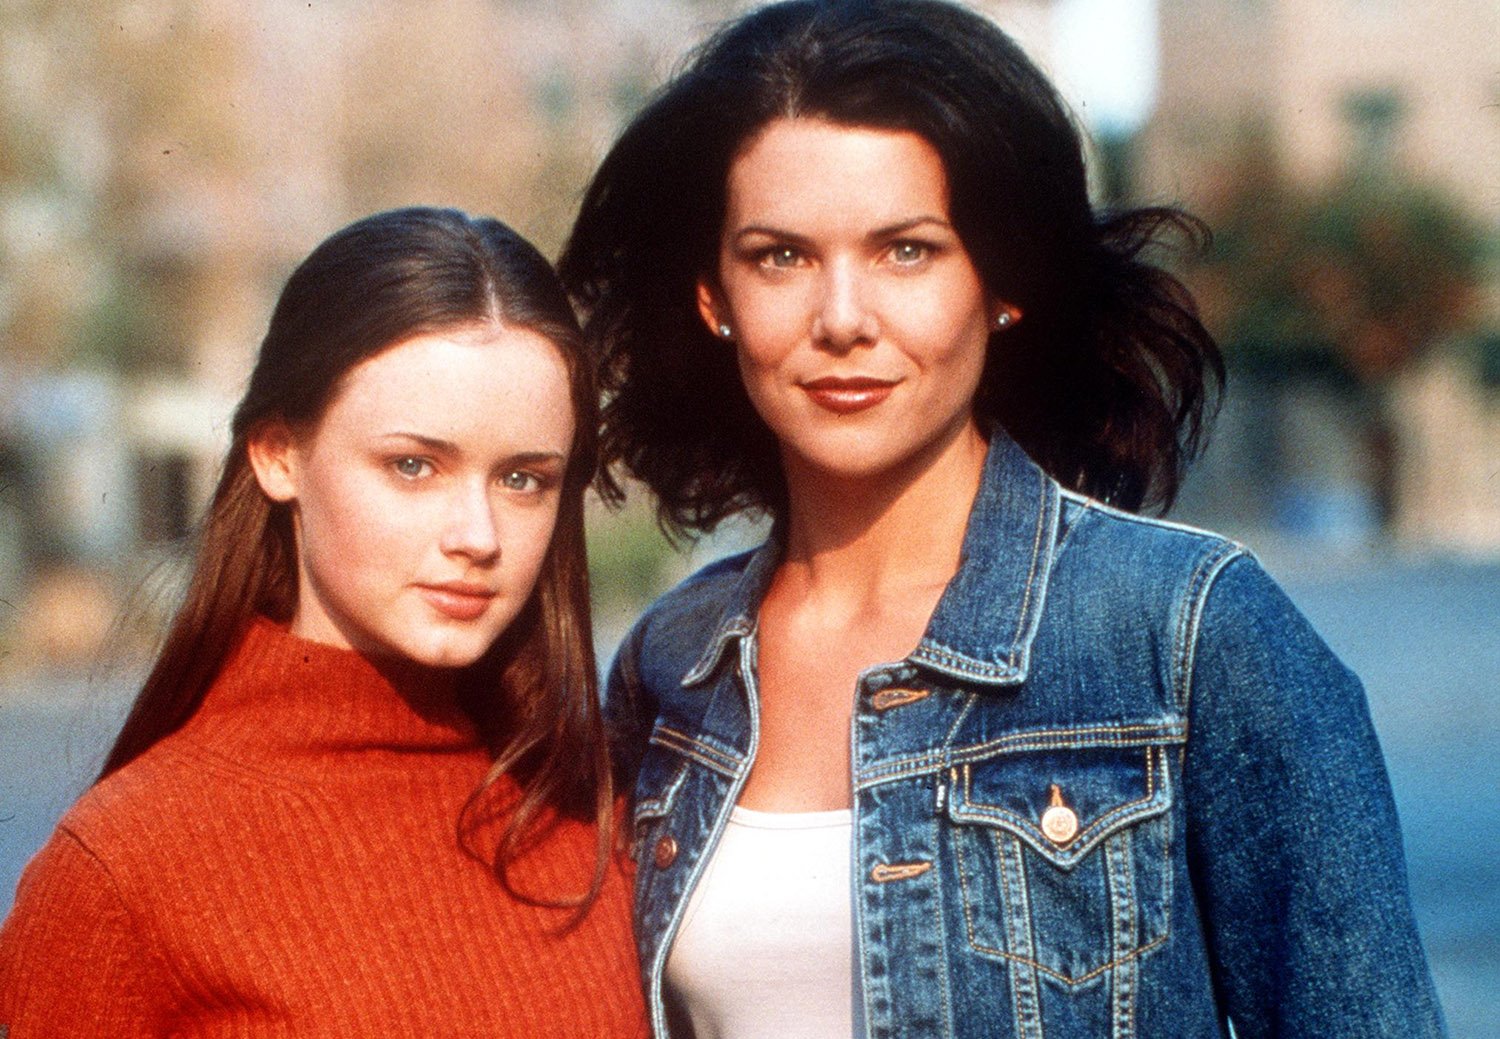 Did You Know ‘Gilmore Girls’ Had Its Own Book Series Written from Rory’s Perspective?